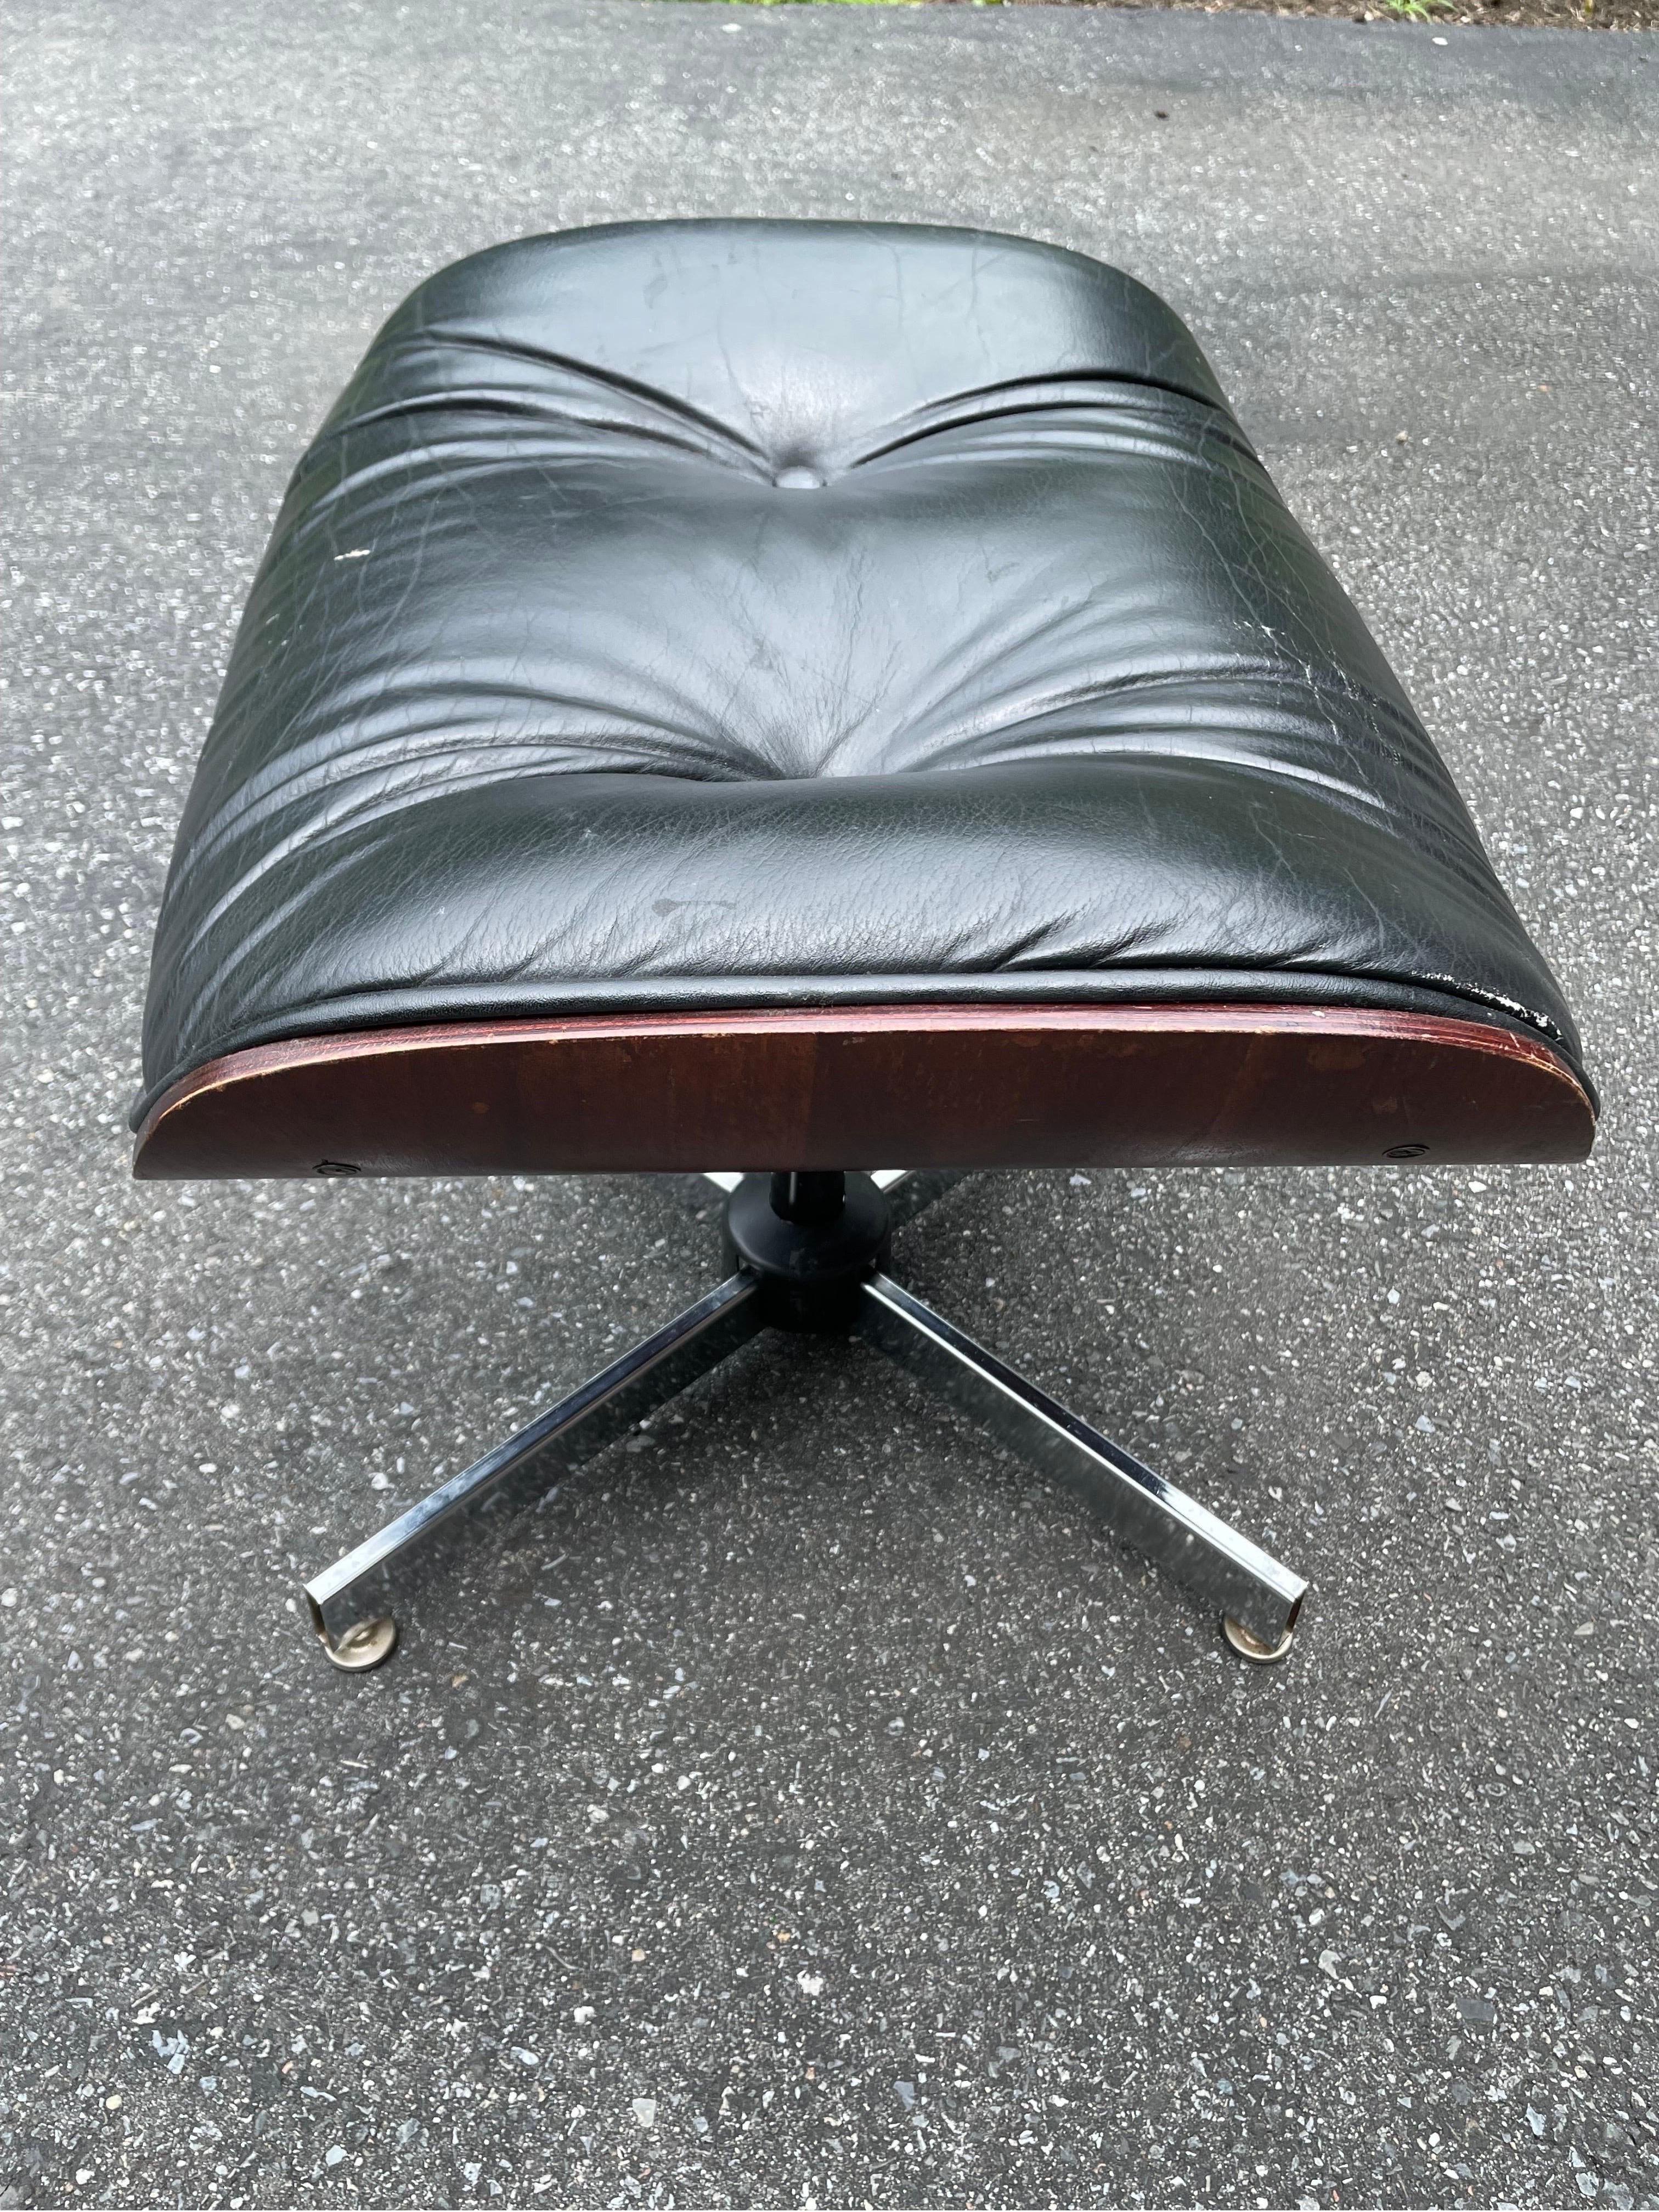 Ottoman only! Possible Selig or Plycraft homage to the great Eames 671. Wonderful replacement option or stand alone workhorse - stool, ottoman, extra seating, etc. This familiar piece has the usual scratches, dings and honest surface wear that only